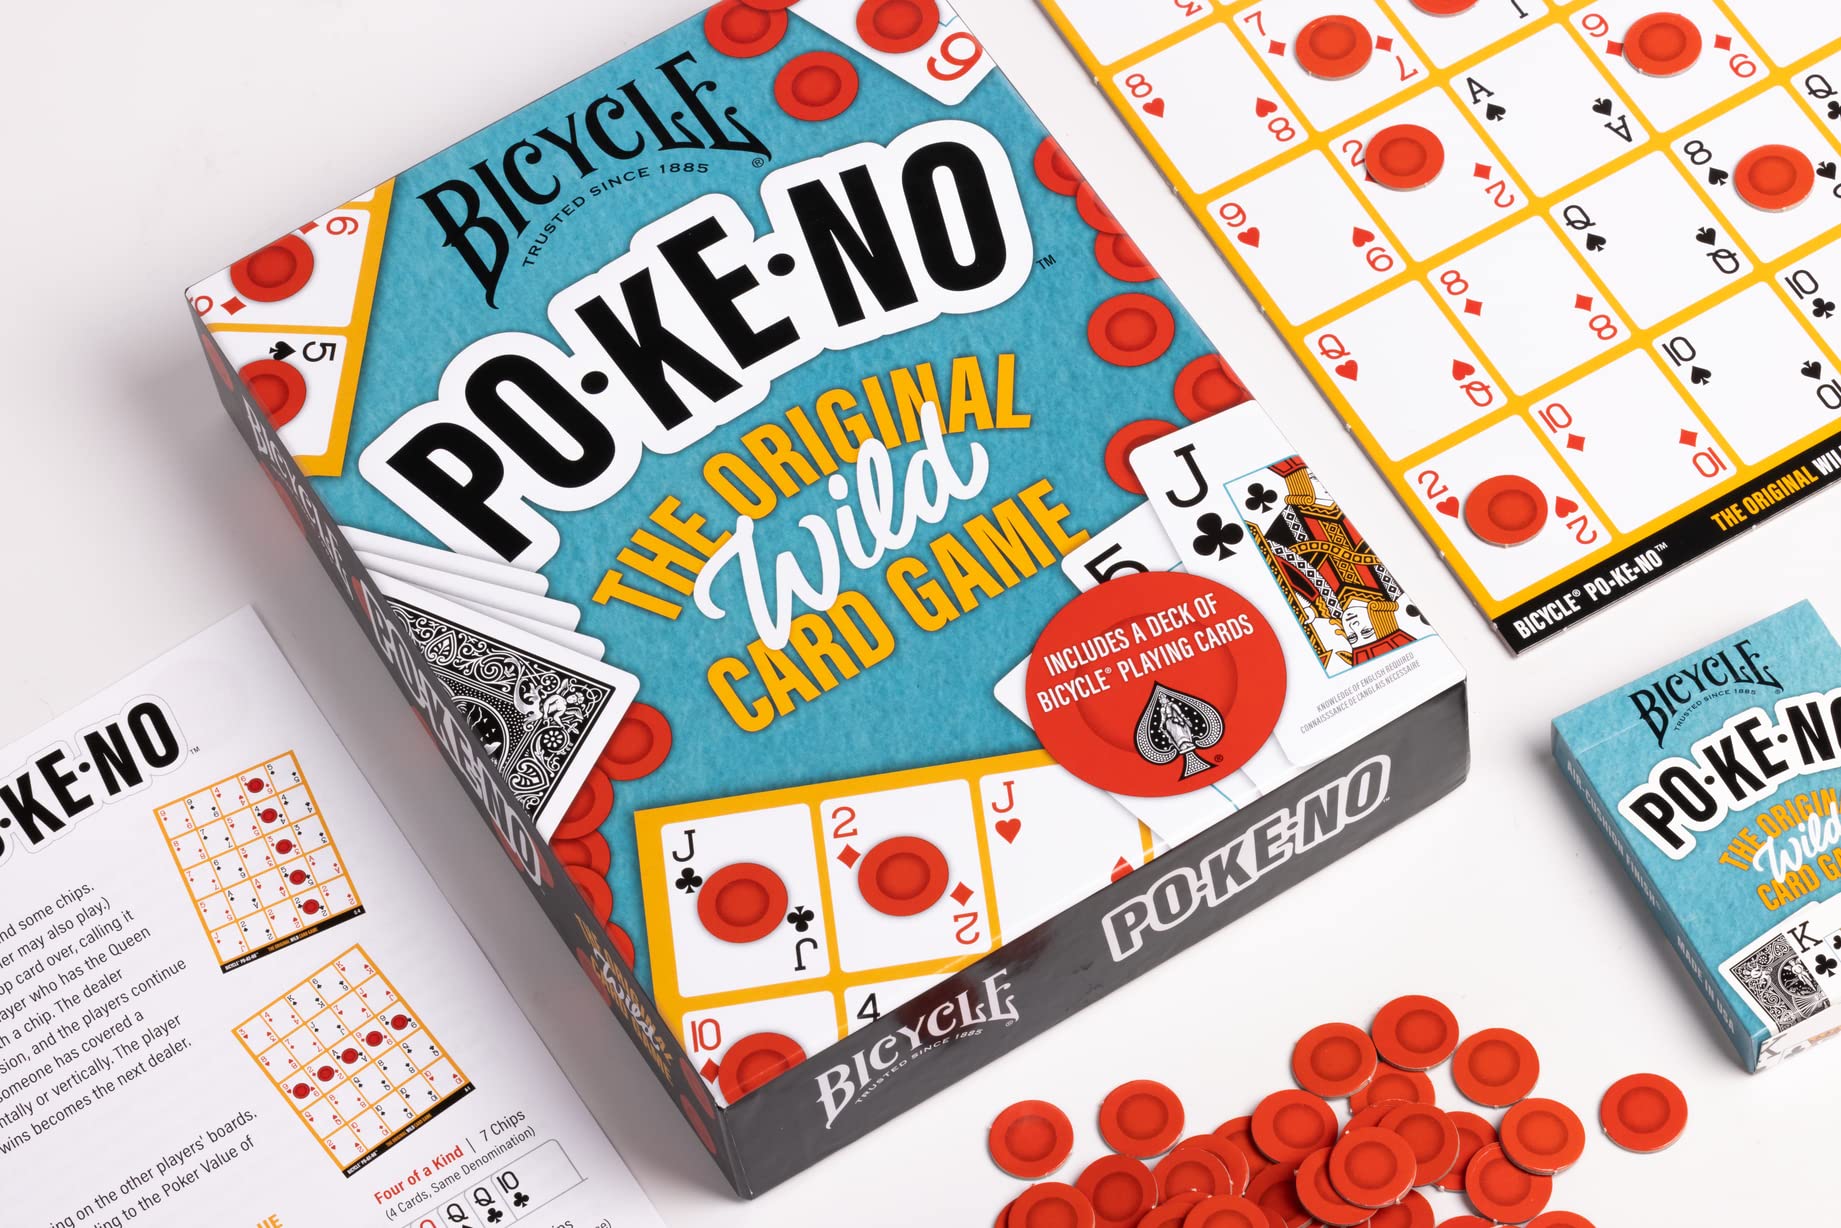 Bicycle Pokeno Playing Card Game Pack (Includes 1 Deck, Scorecards, and Chips)